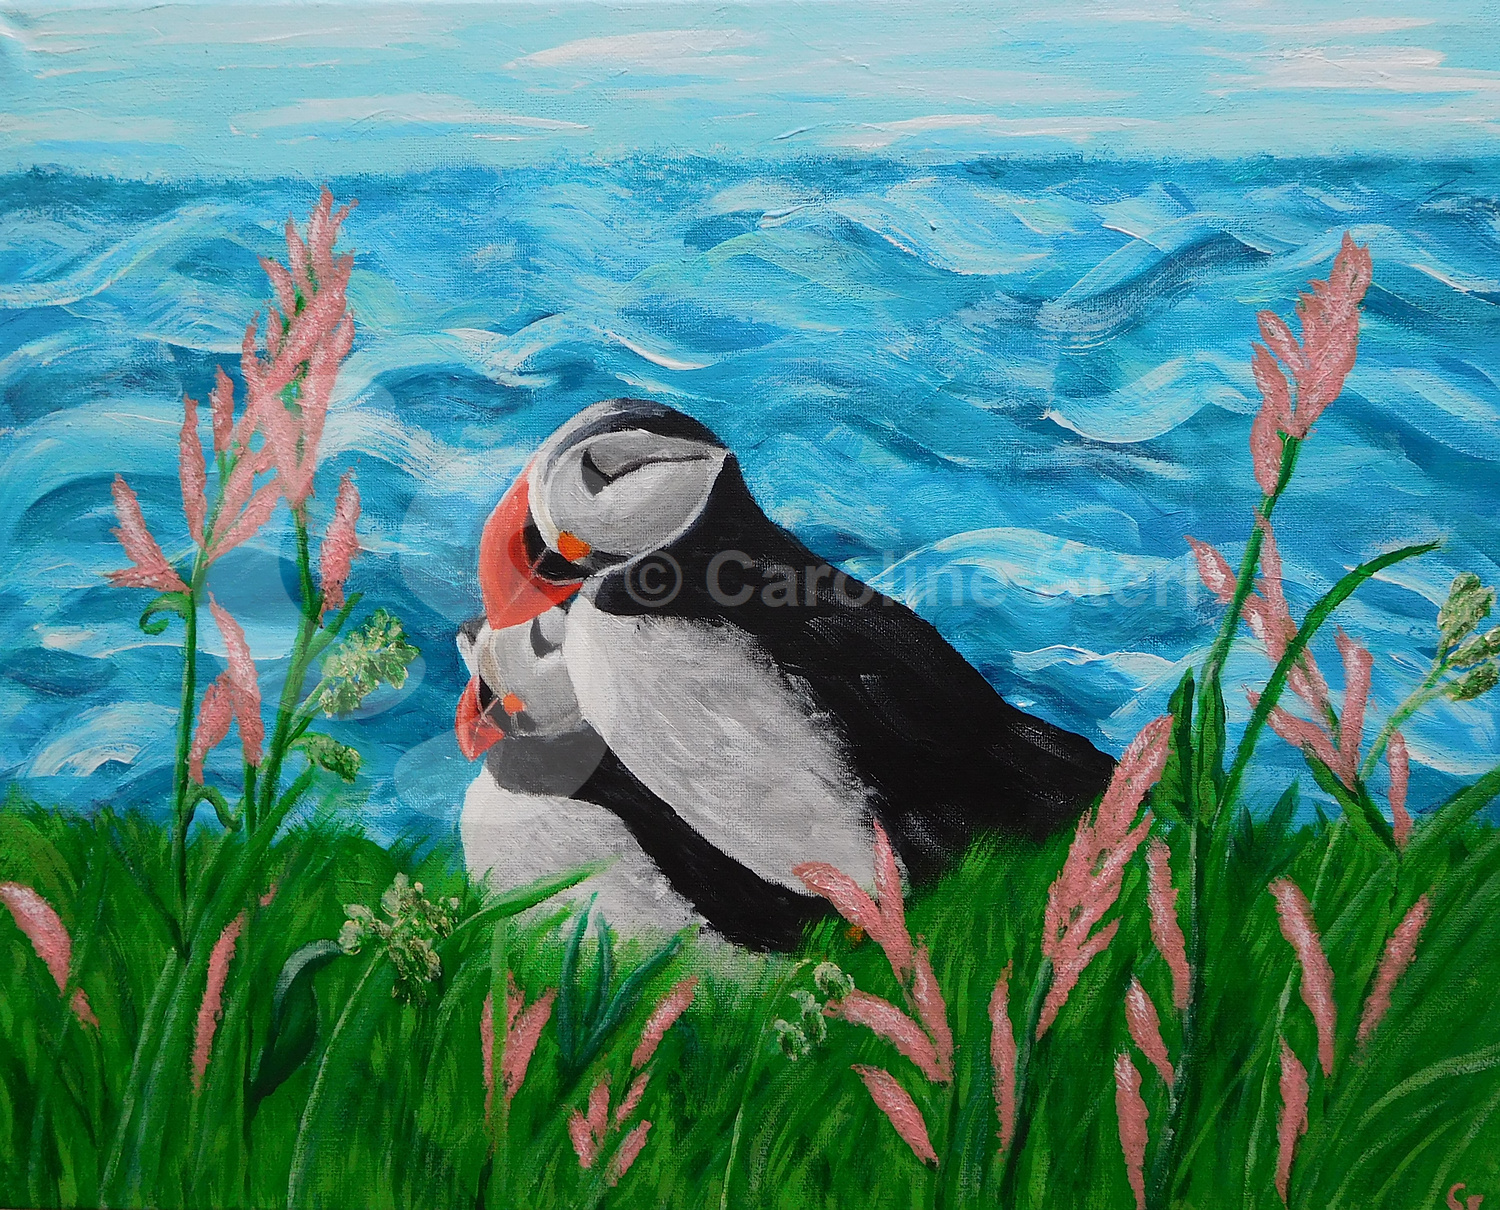 Painting: Puffins